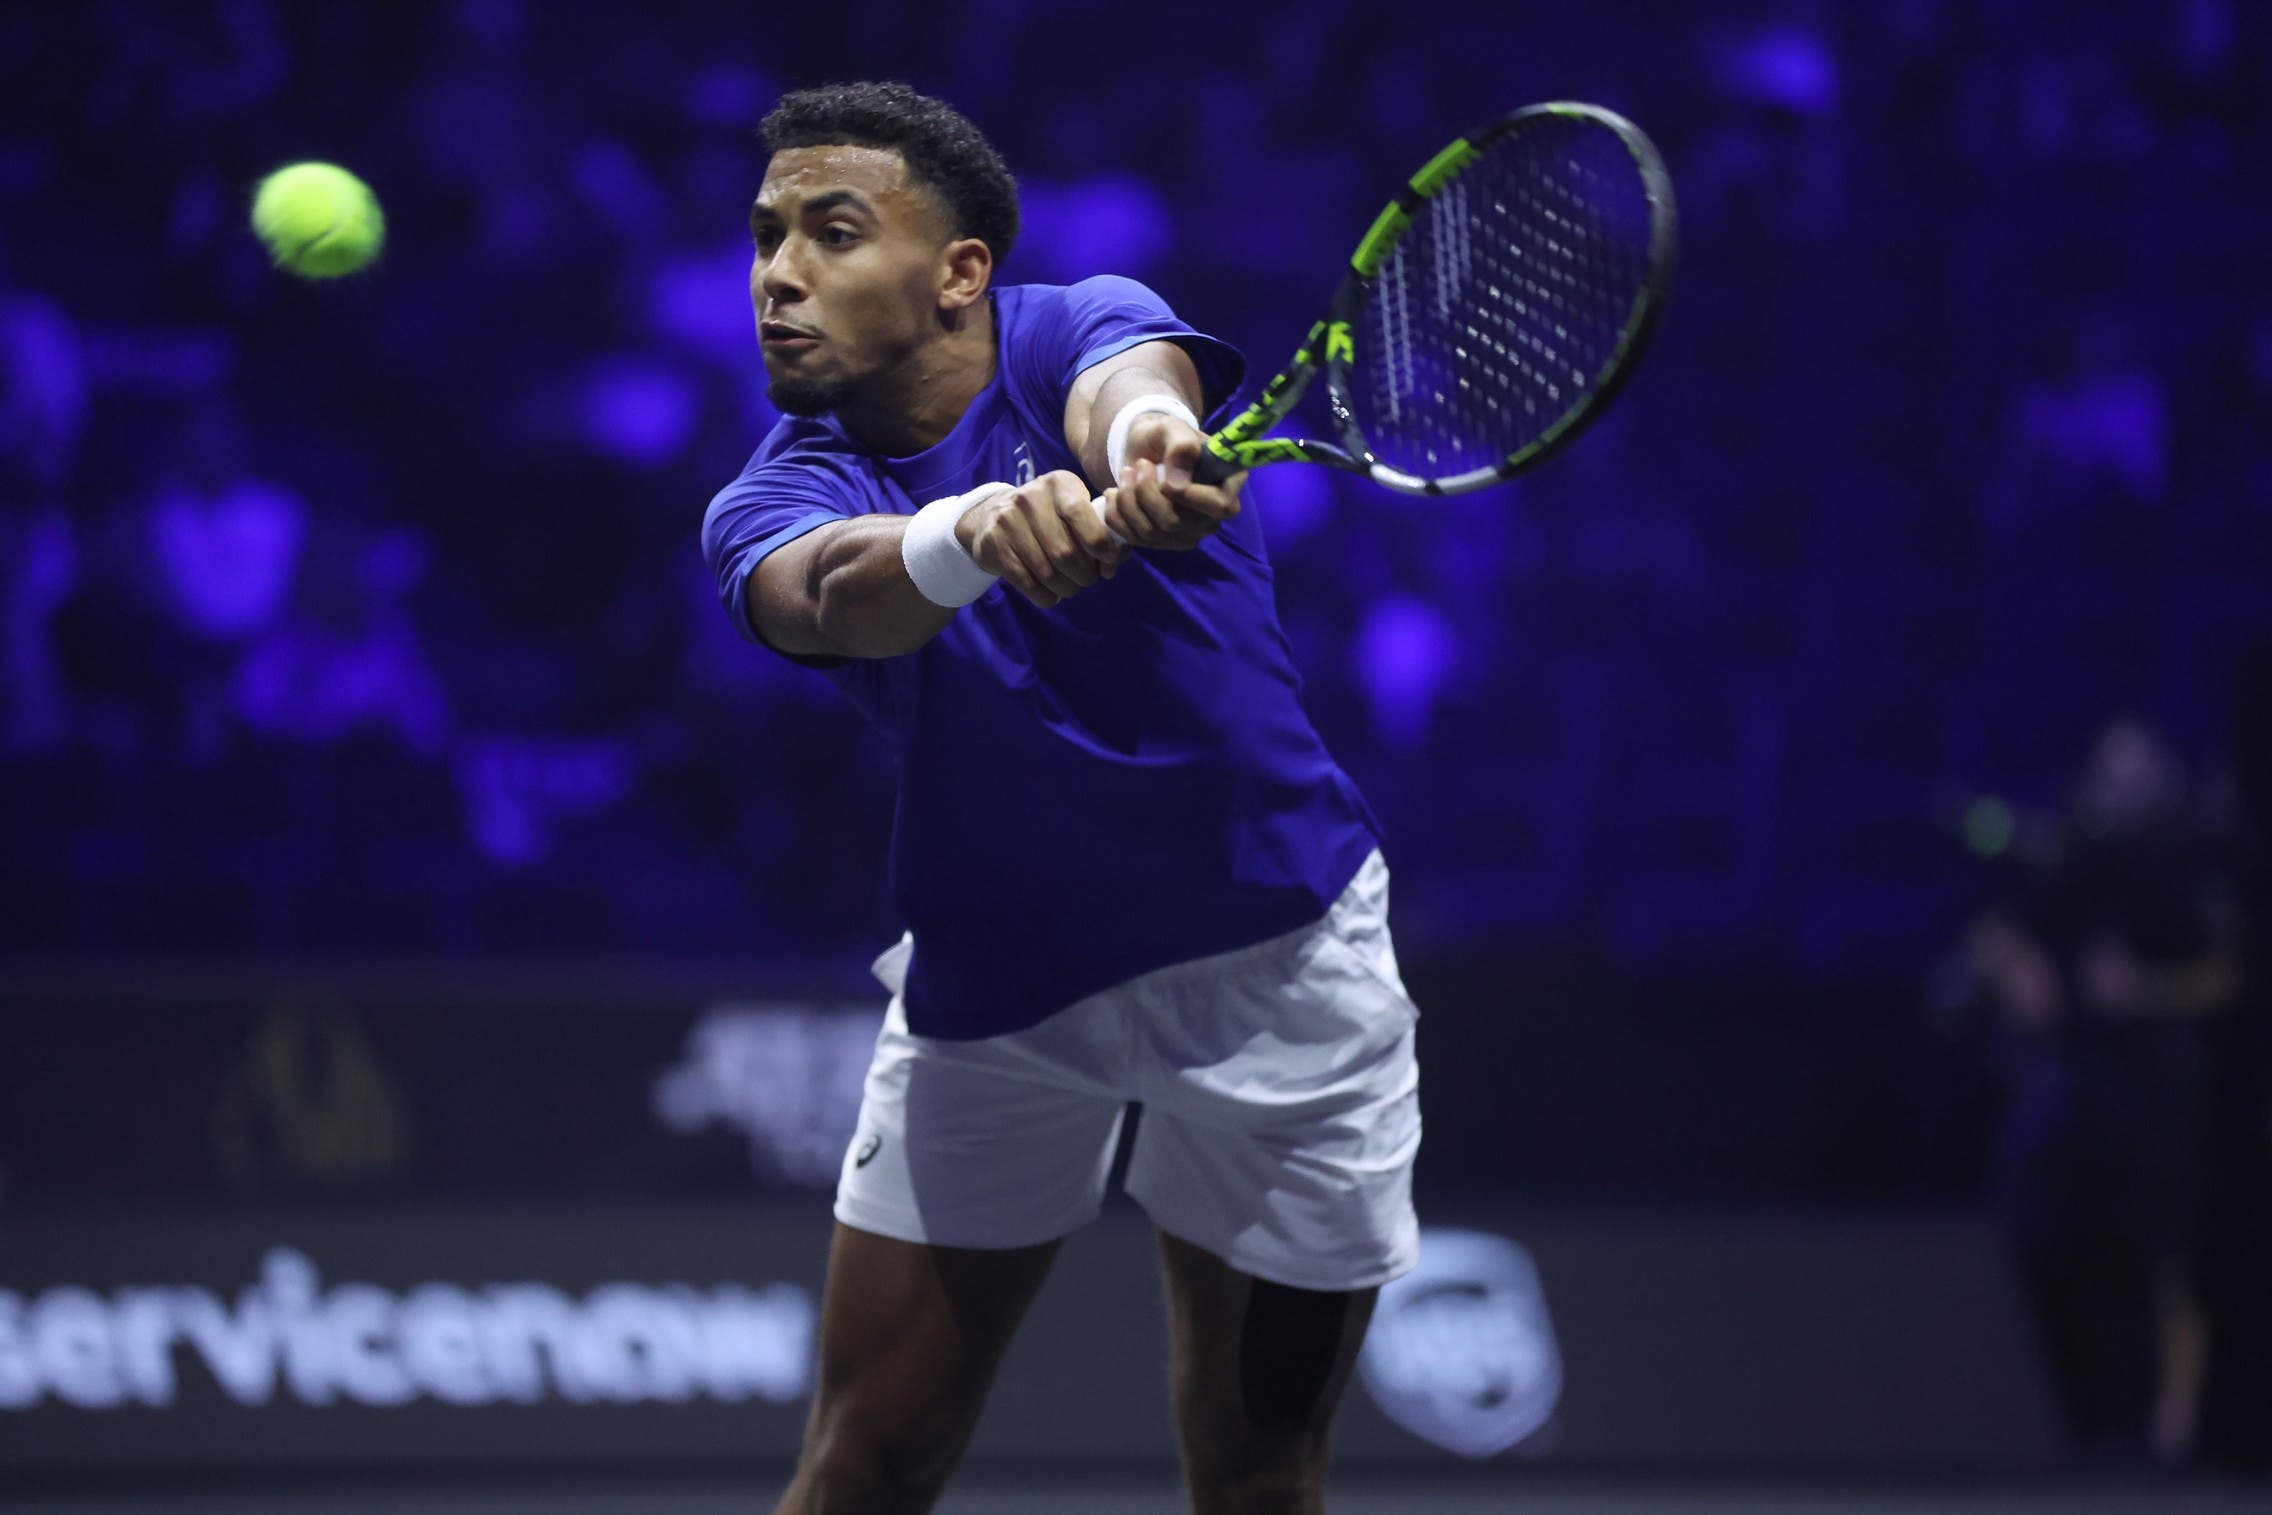 VANCOUVER, BRITISH COLUMBIA - SEPTEMBER 22: Arthur Fils of Team Europe plays in a match against Ben Shelton of Team World during day one of the Laver Cup at Rogers Arena on September 22, 2023 in Vancouver, British Columbia. (Photo by Matthew Stockman/Getty Images for Laver Cup)